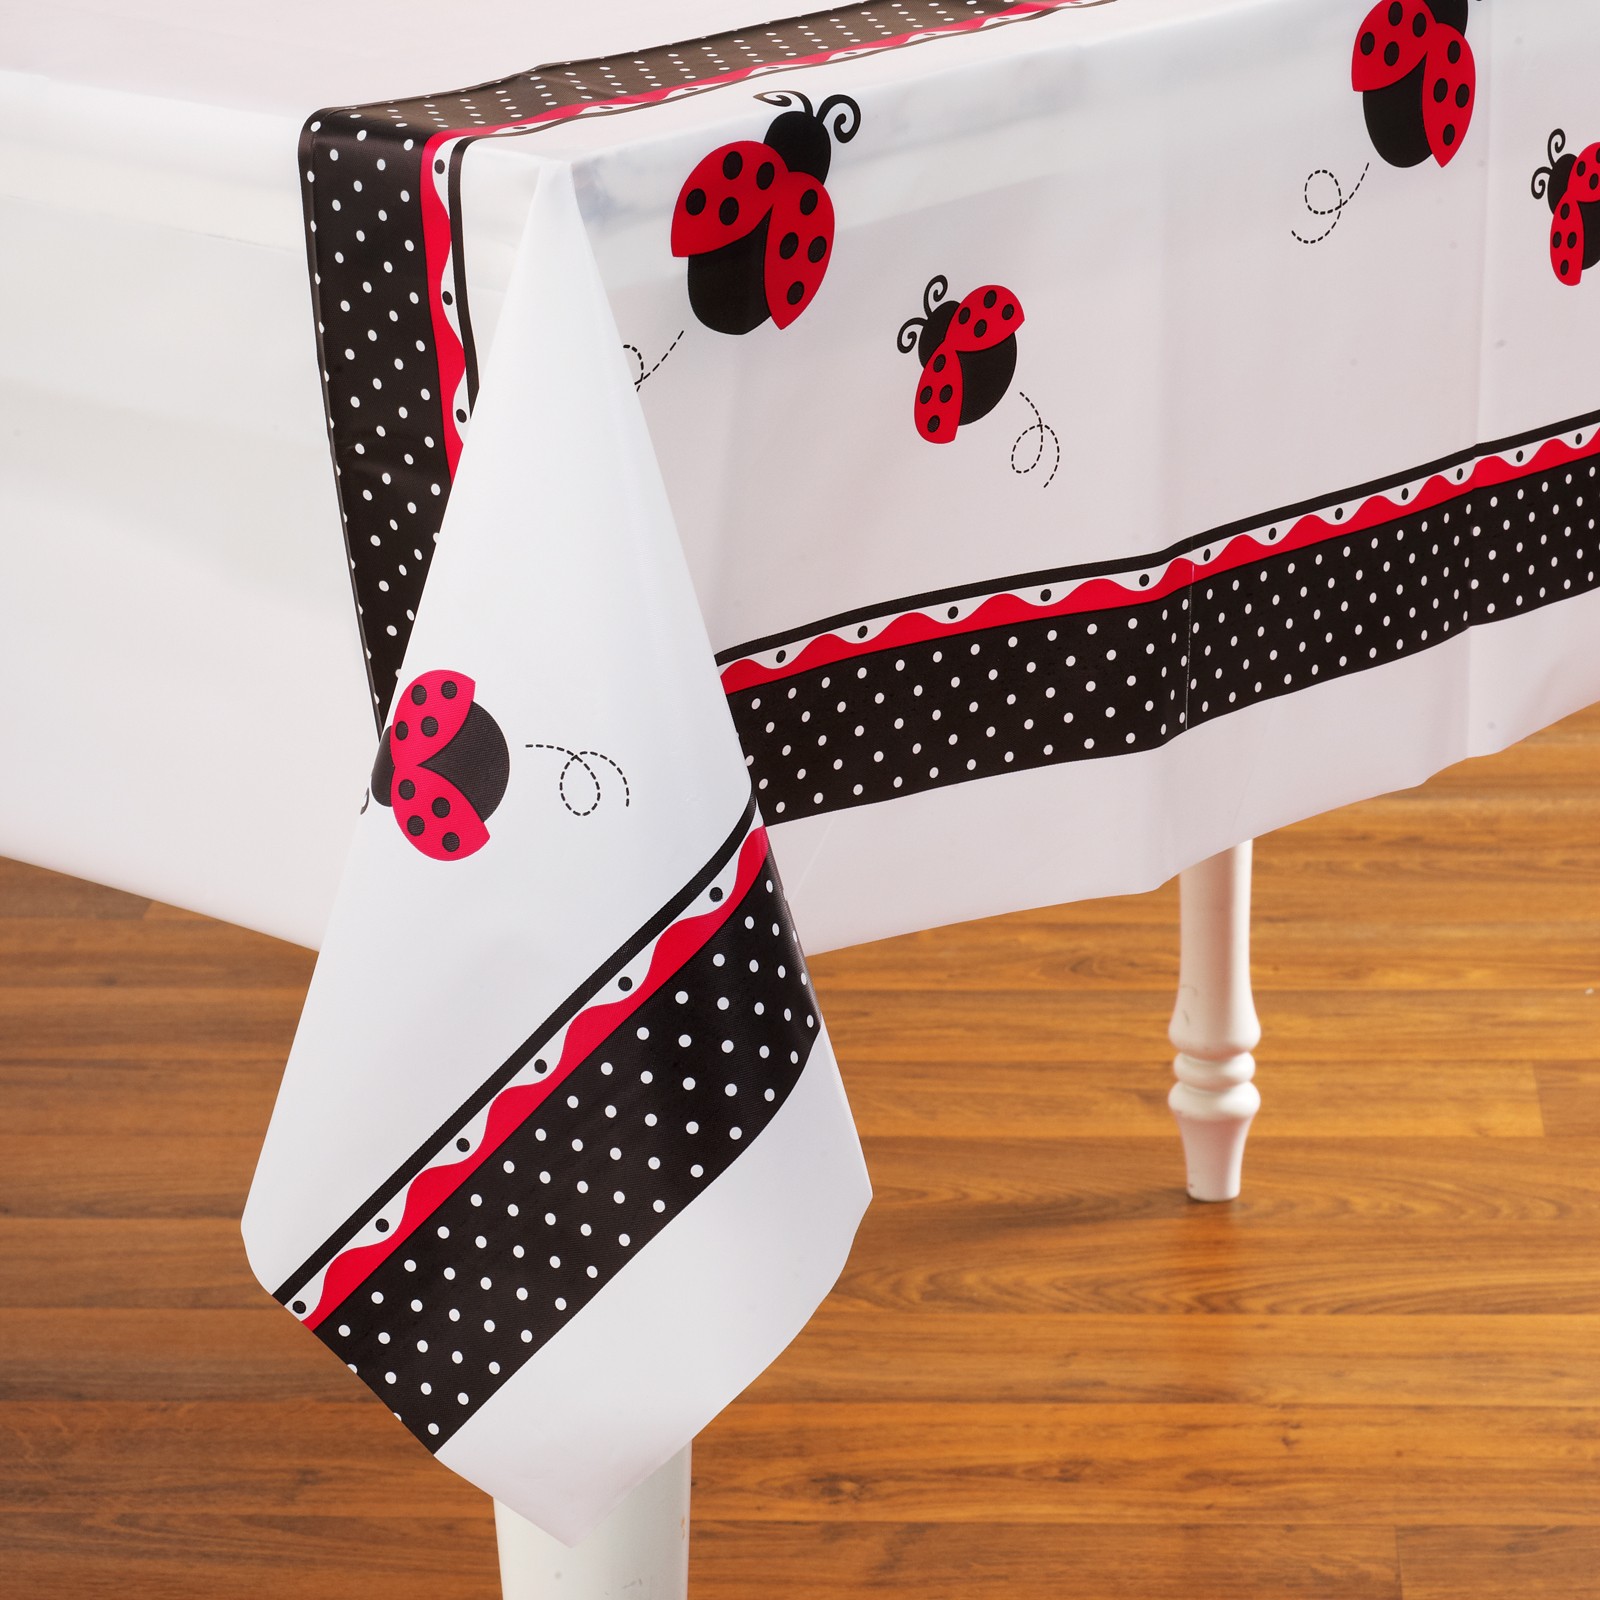 LadyBug Fancy Plastic Tablecover: Ladybug First Birthday Party Decorations for Your Little Lady!